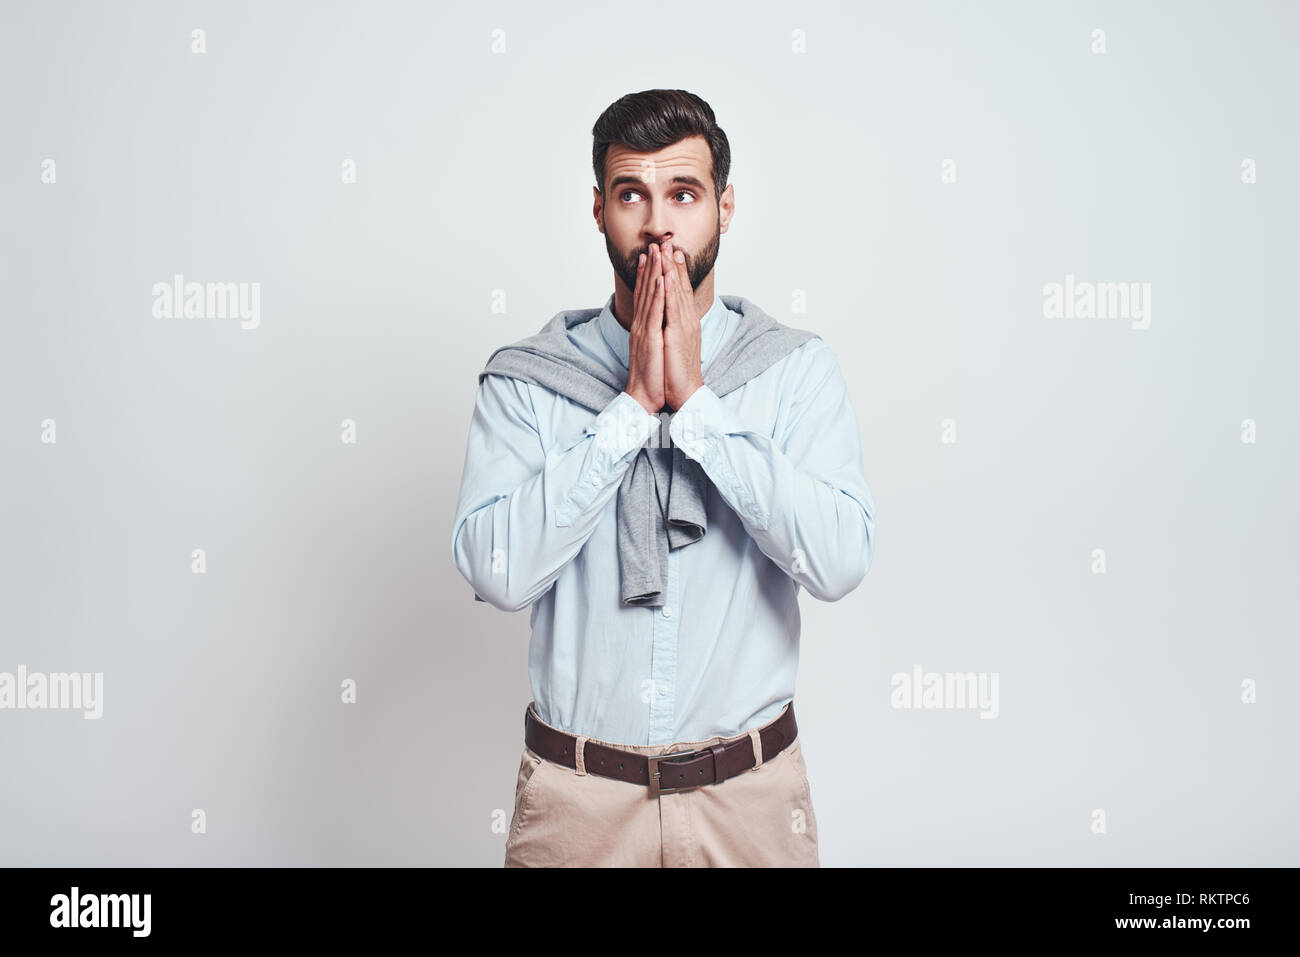 Oops. Confused young bearded man is covering mouth with hands while standing against grey background. Close-up portrait. Emotion expression. Stock Photo